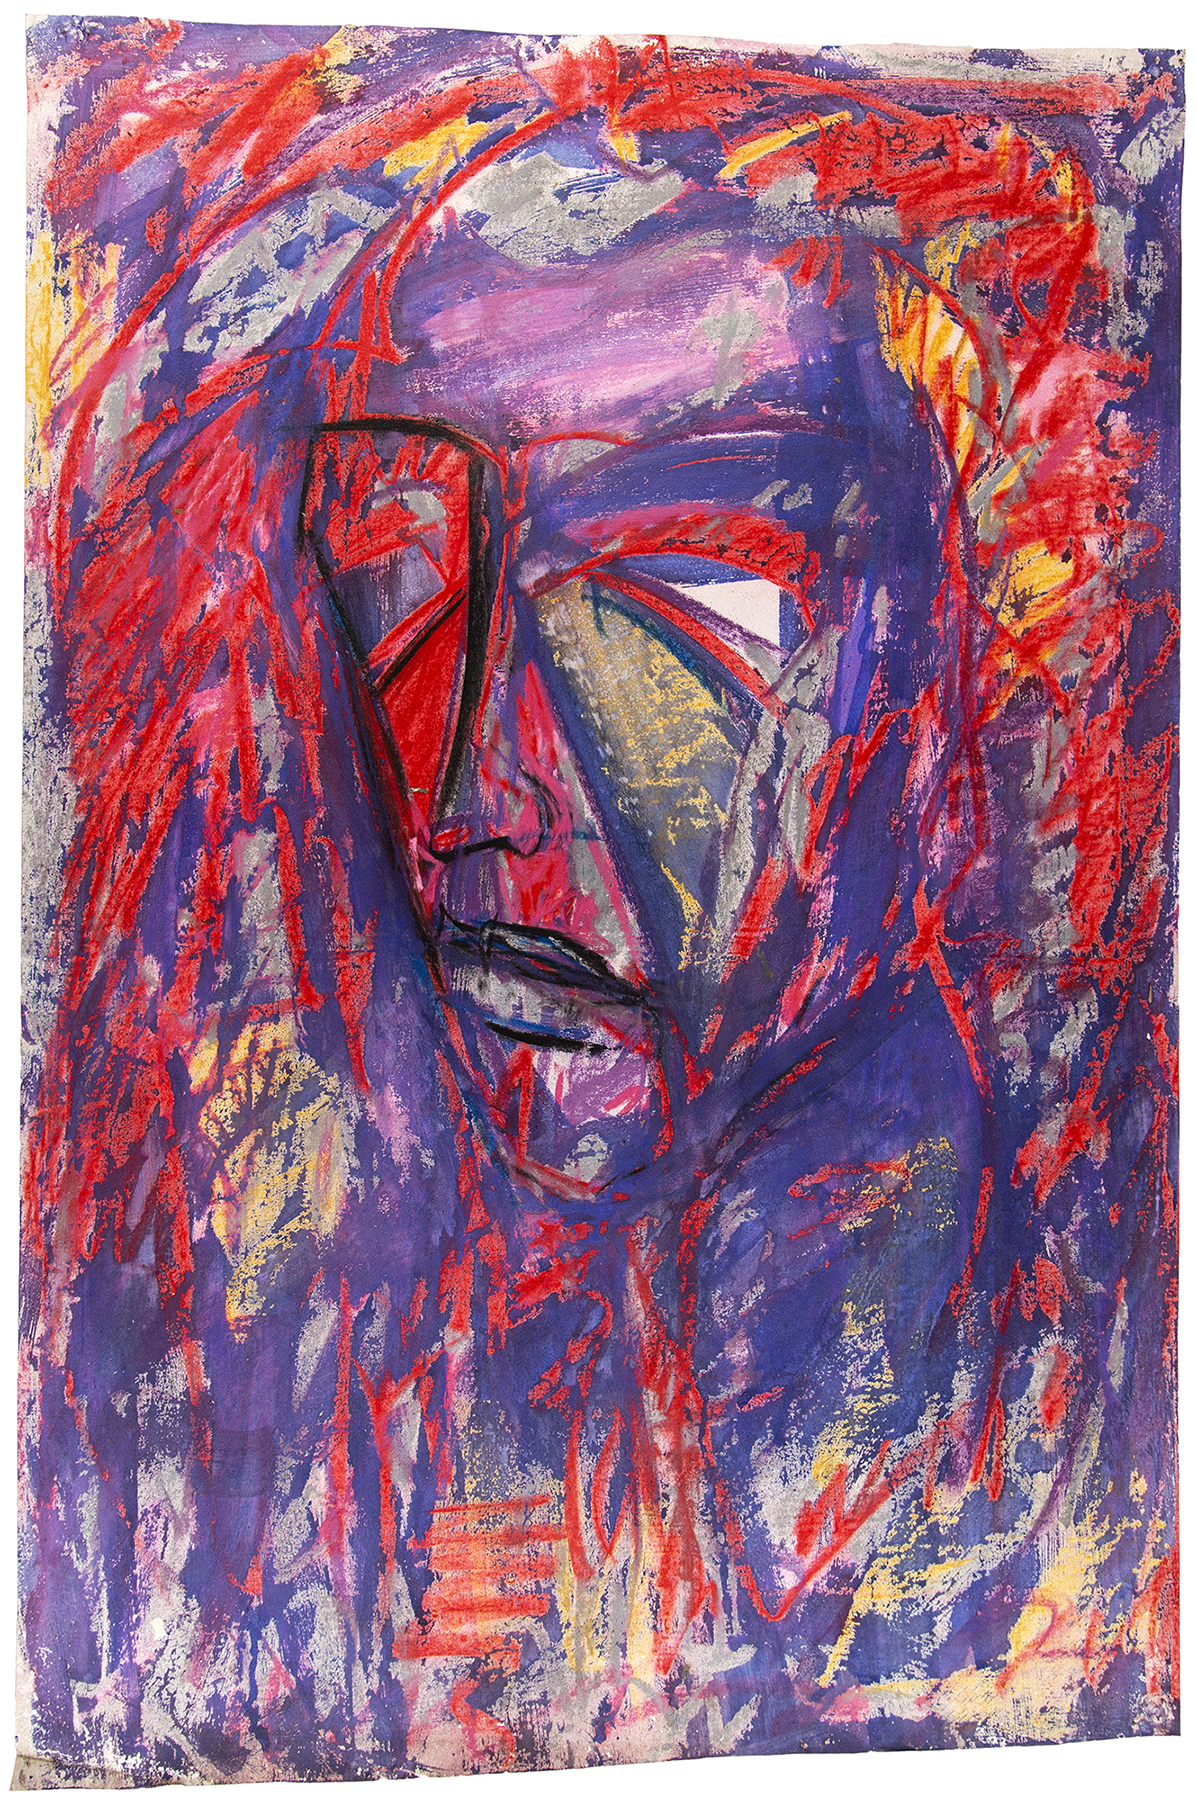 Abstract drawing of a figure's face in red, purple, black and orange